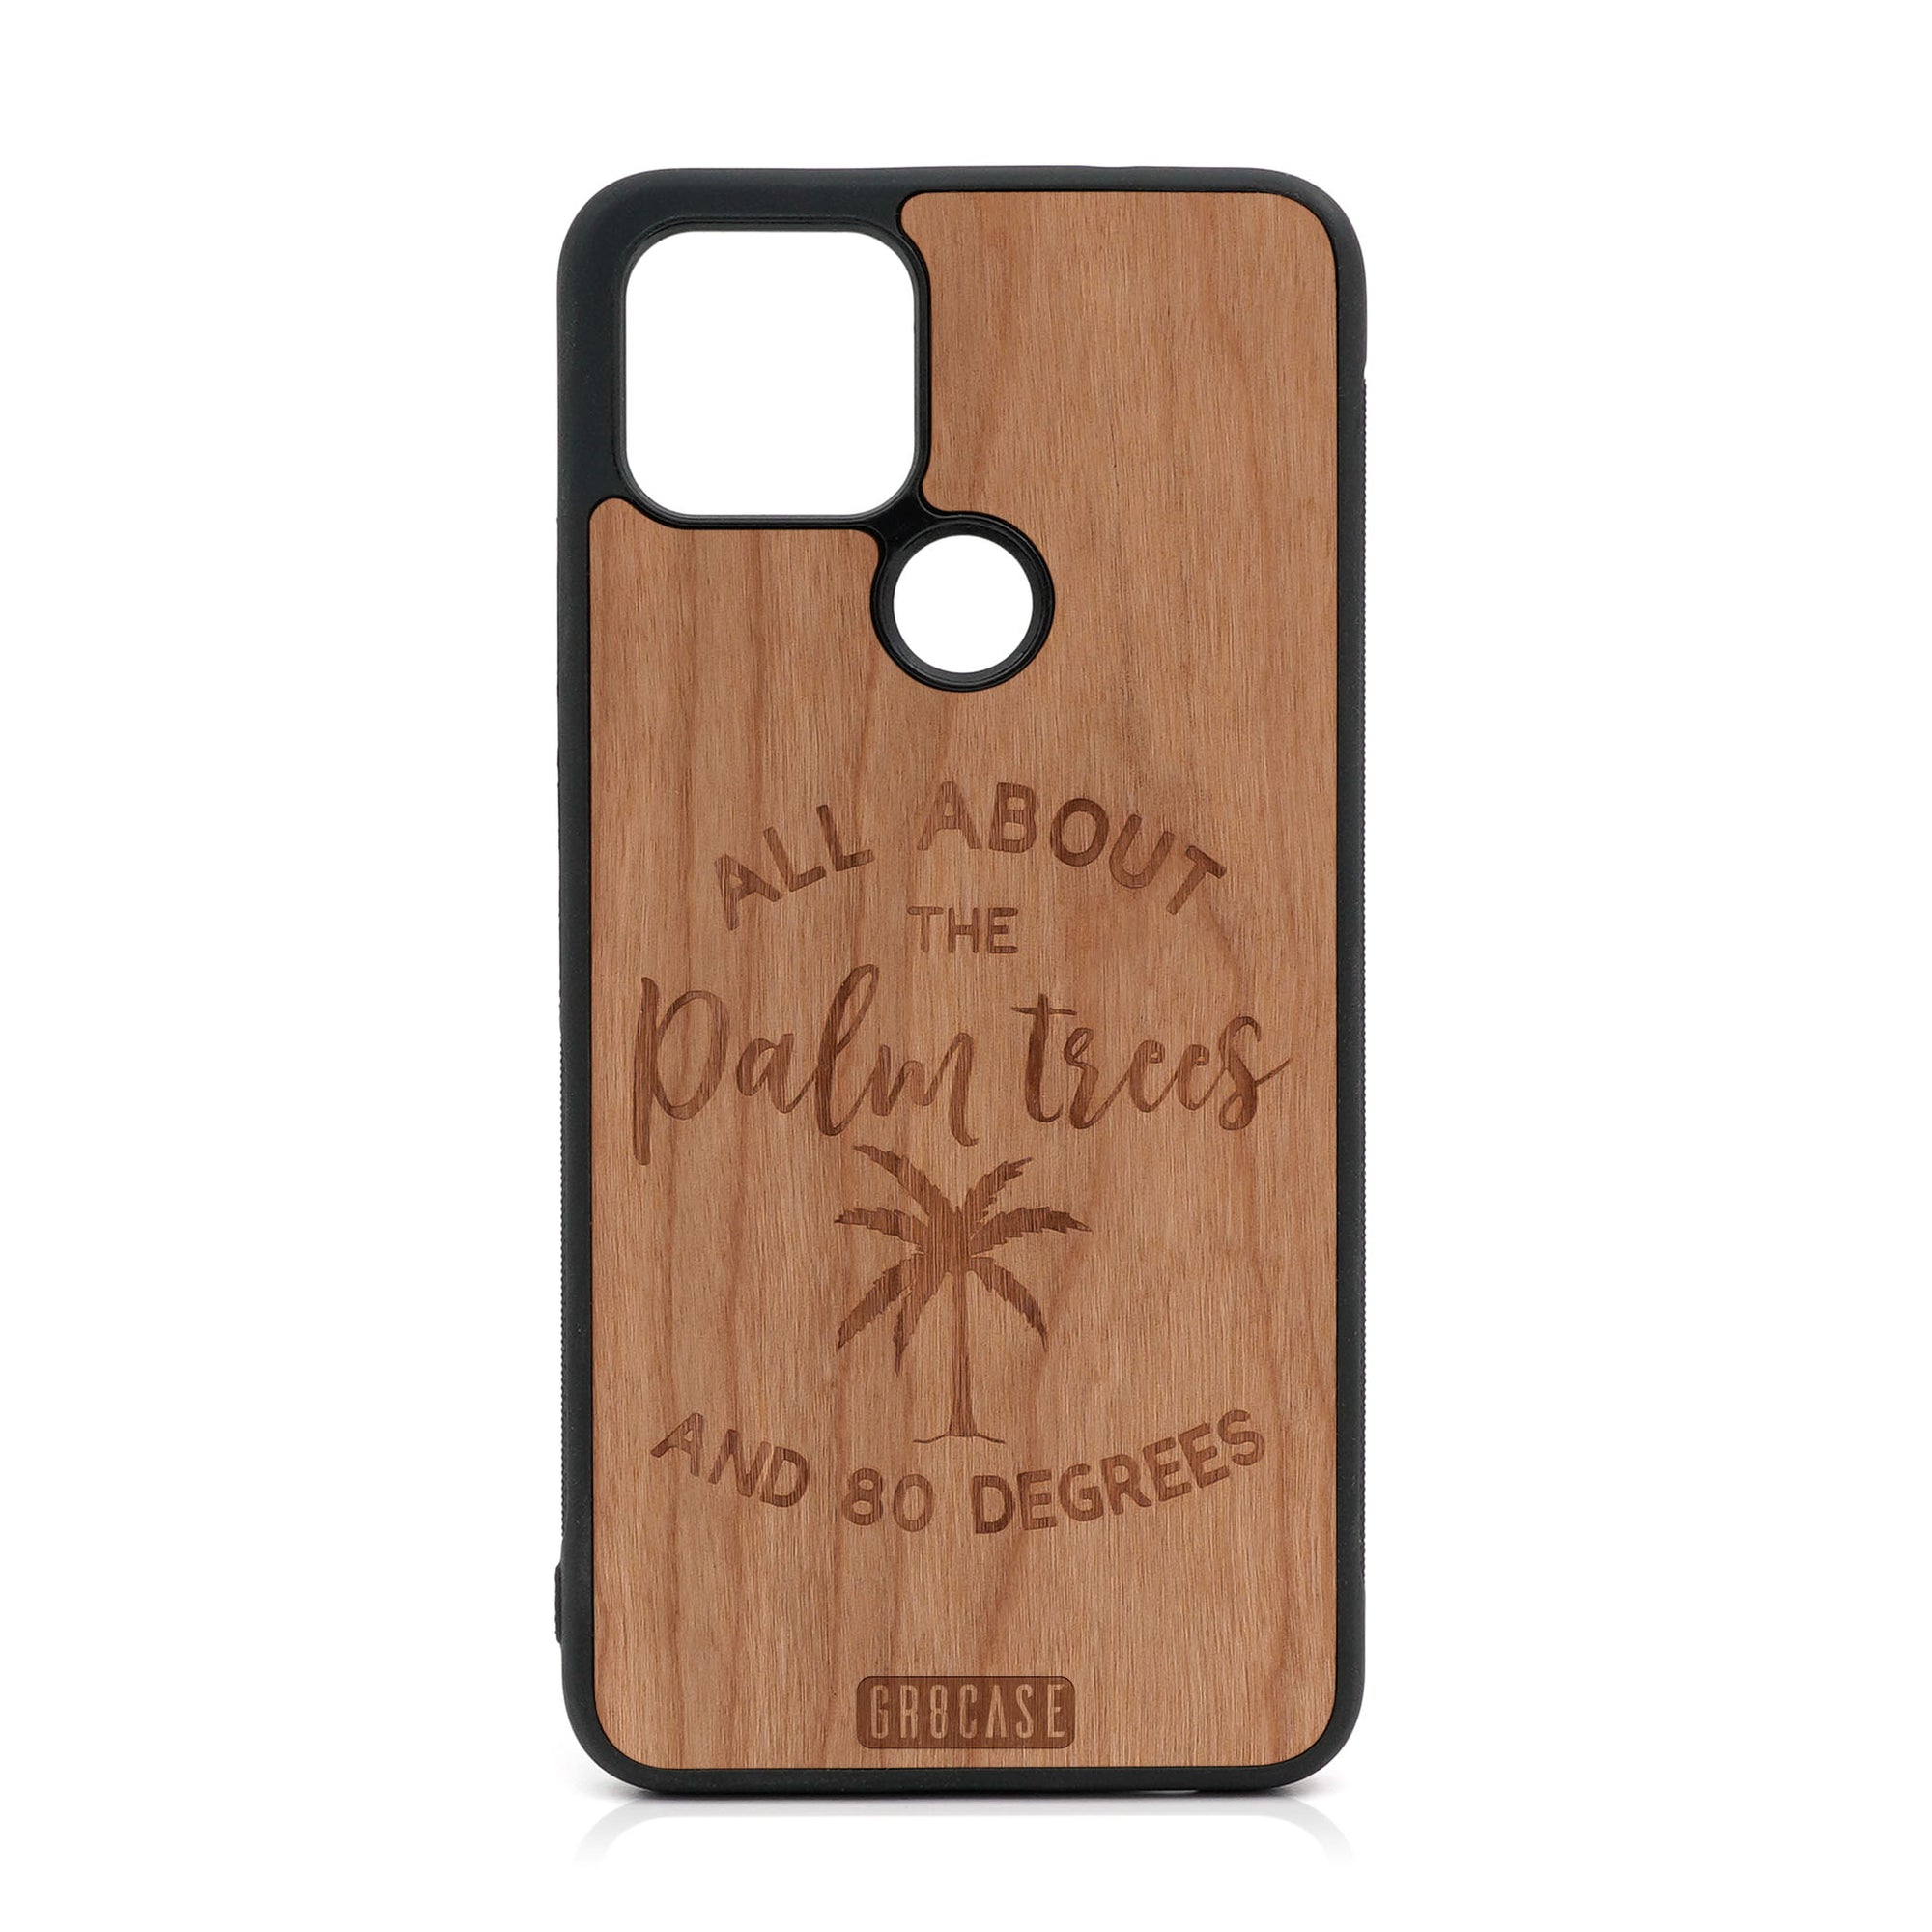 All About The Palm Trees And 80 Degree Design Wood Case For Google Pixel 5 XL/4A 5G